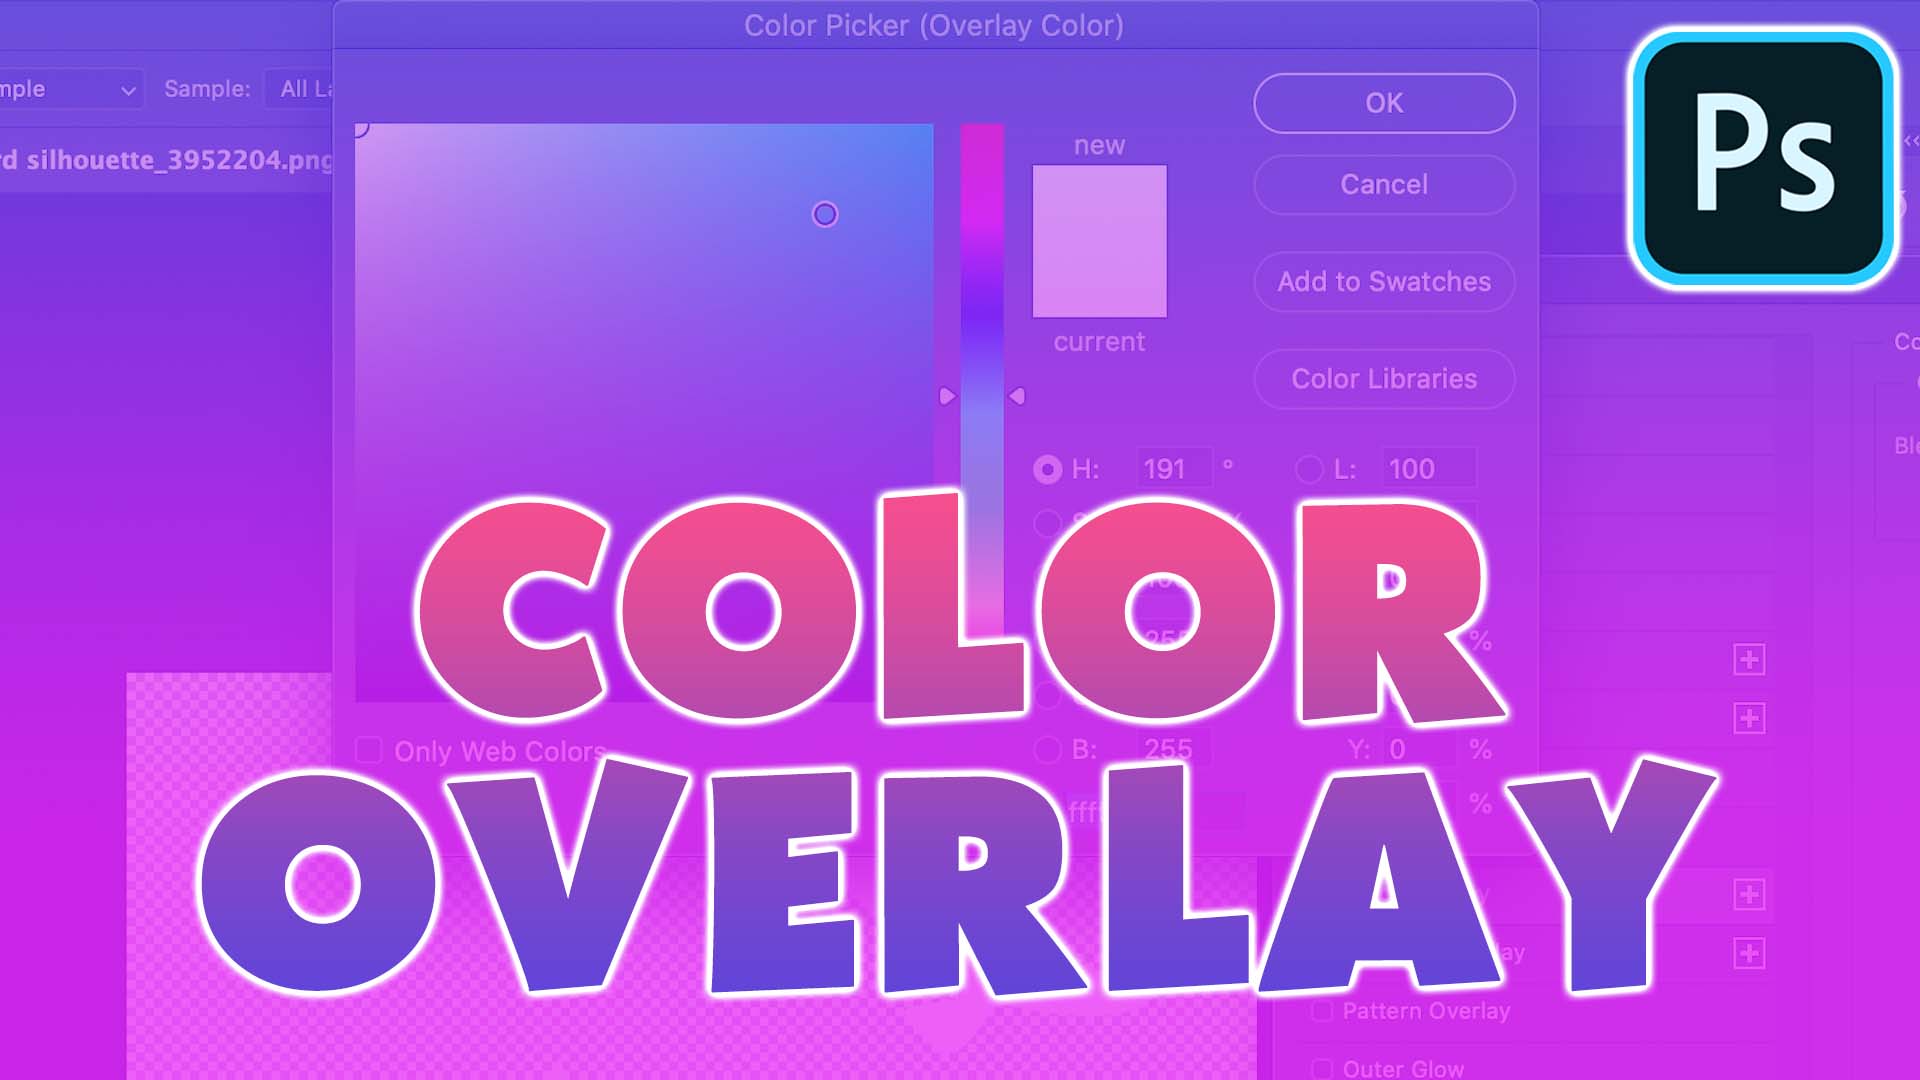 Photoshop Tutorial: Change the Color of an Object (Using Color Overlays)